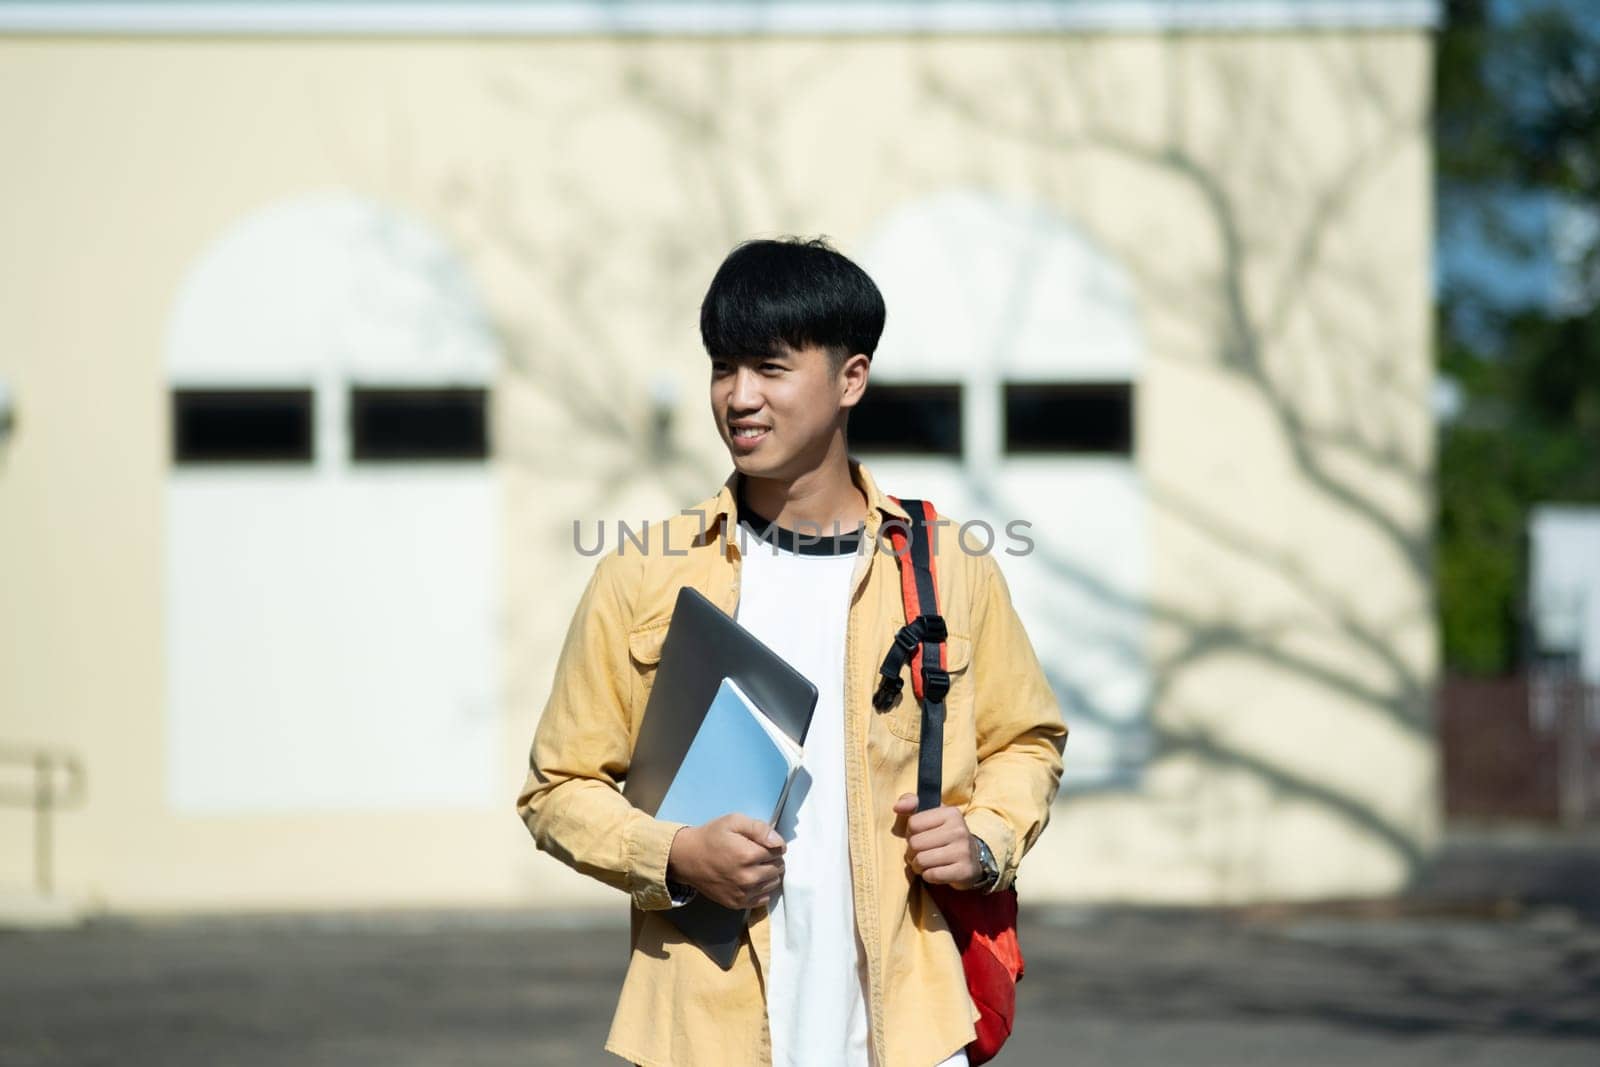 A contented college student carrying a laptop and books walks across the campus grounds, exuding a sense of readiness and enthusiasm for learning.